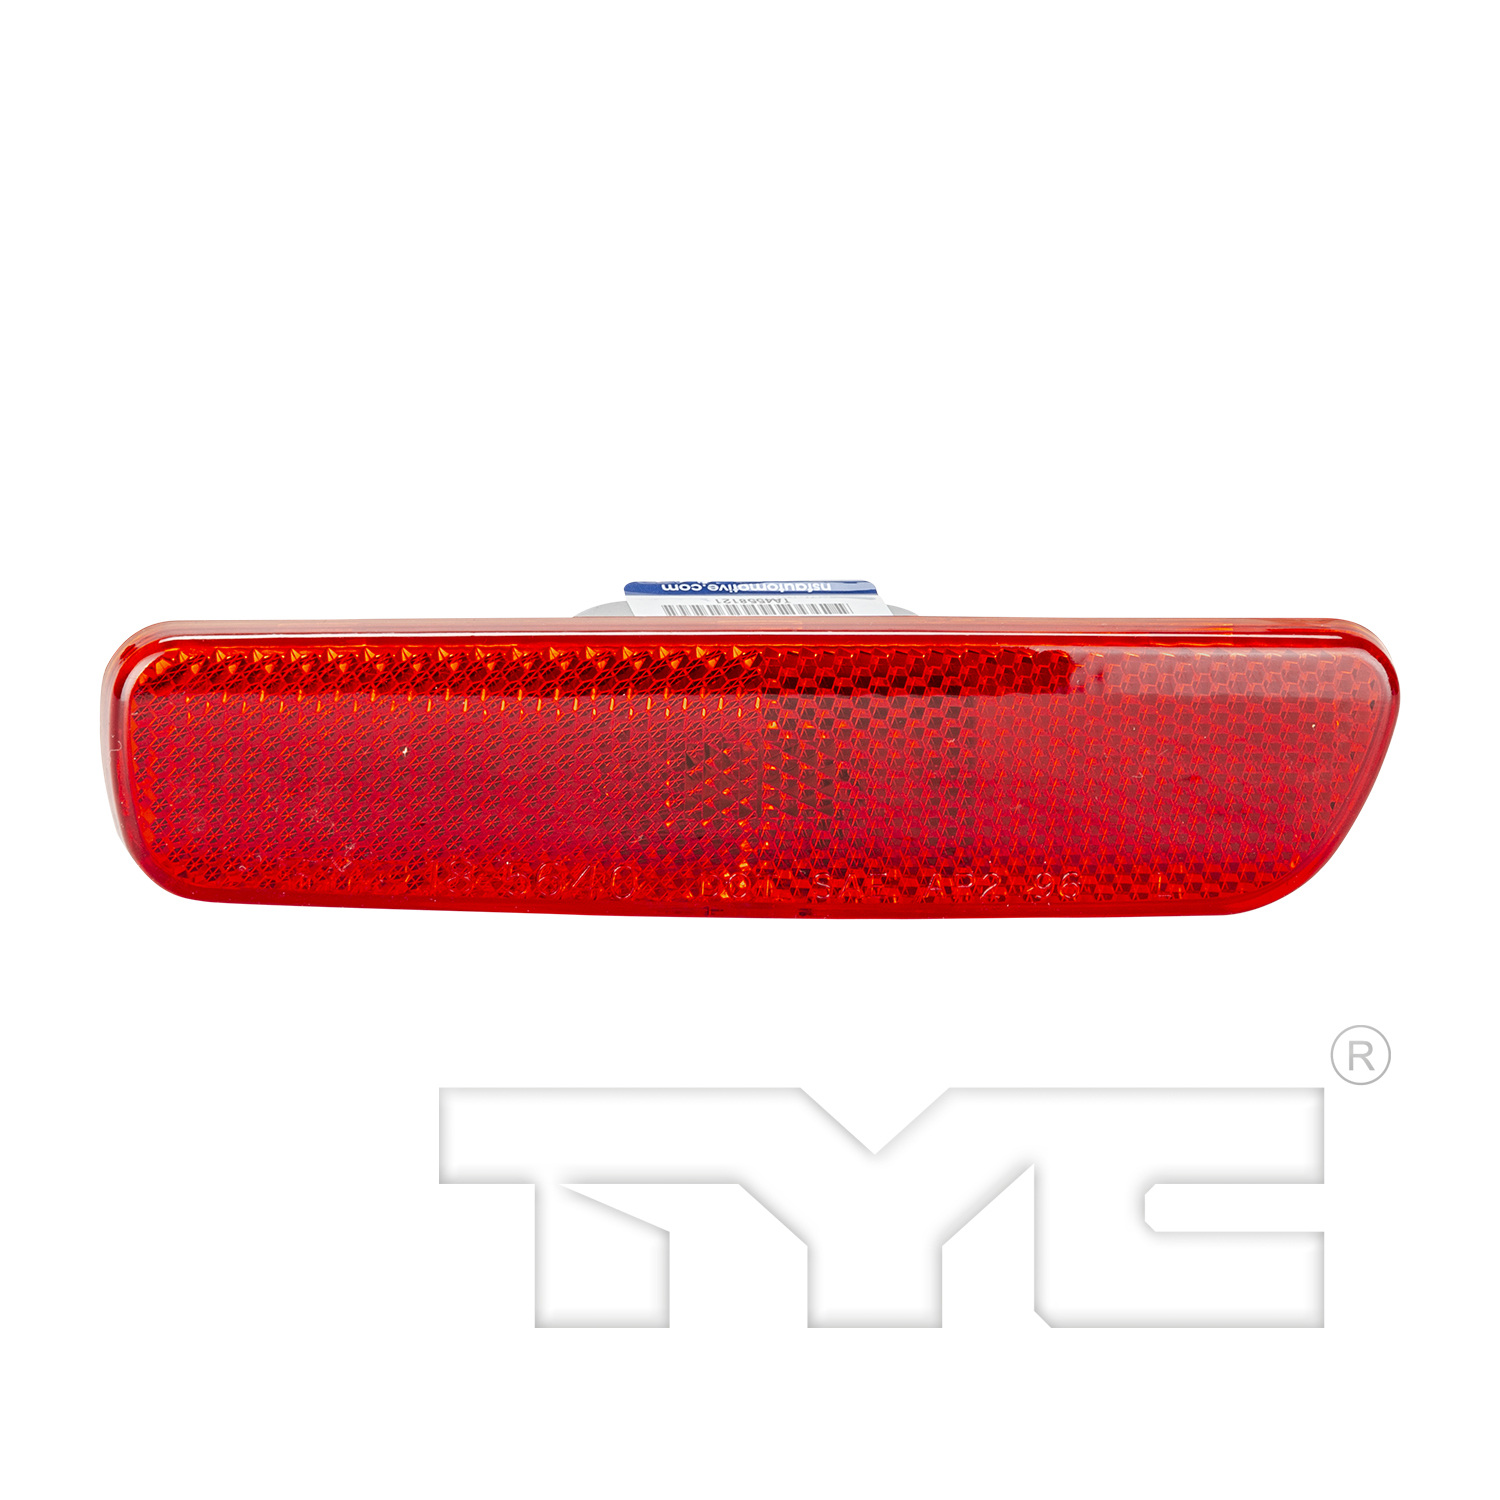 Aftermarket LAMPS for LEXUS - RX300, RX300,99-03,RT Rear marker lamp assy